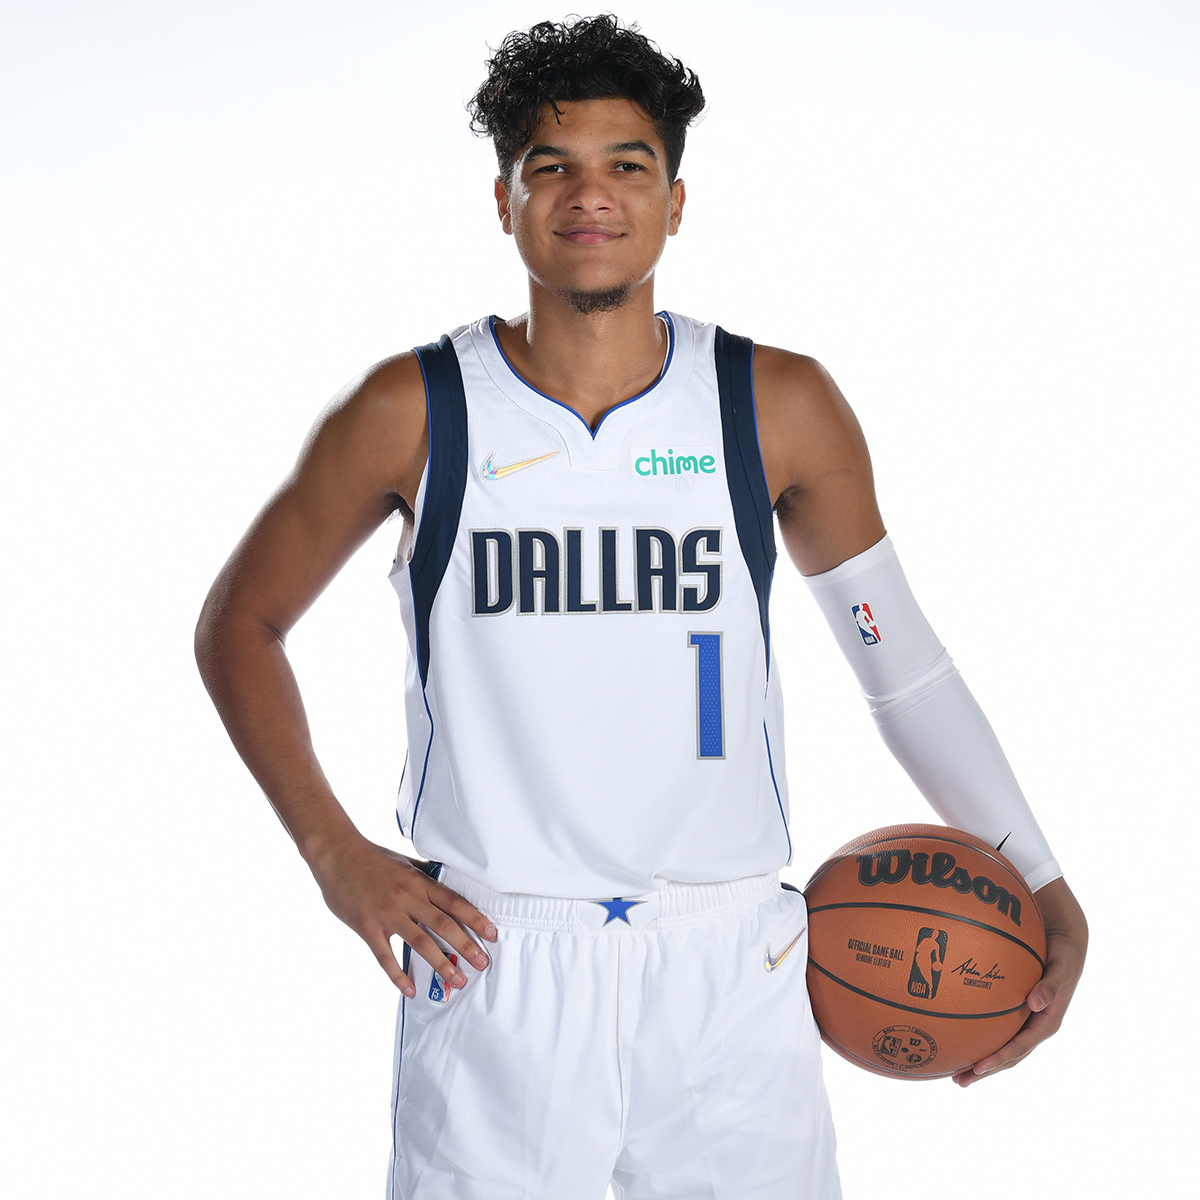 NBA Player Tyrell Terry Announces Retirement at 22 Due to “Anxiety This Sport Has Caused Me” – E! Online